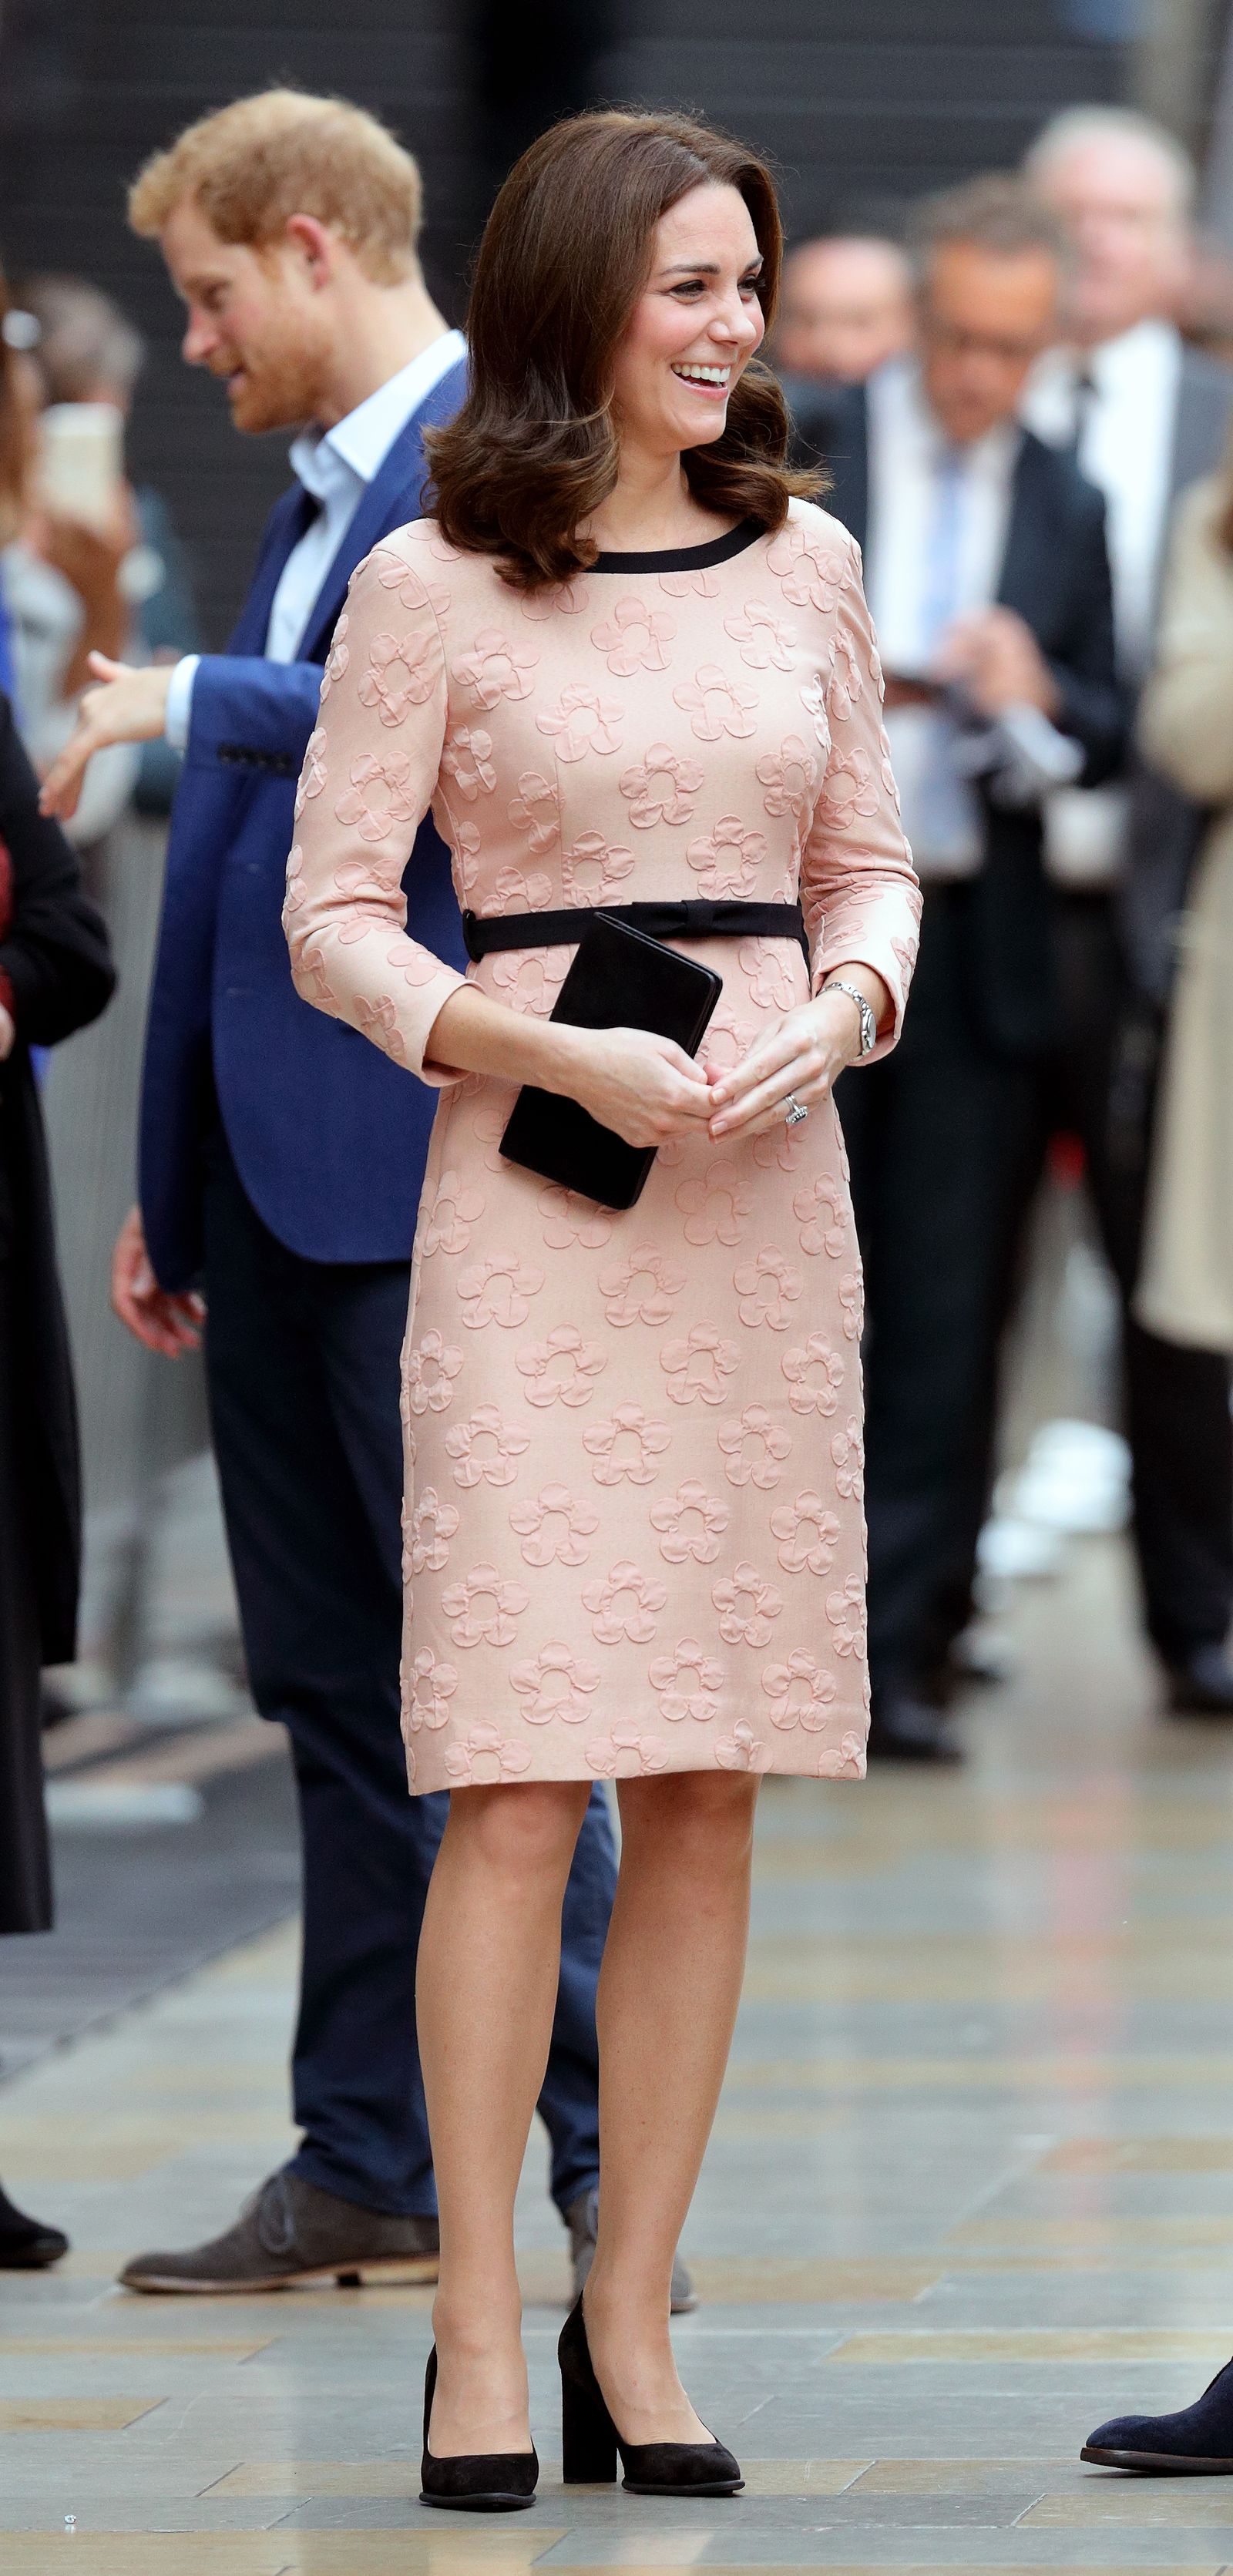 Kate Middleton Wears Non-Slip Tights to Keep Shoes in Place | Who What Wear